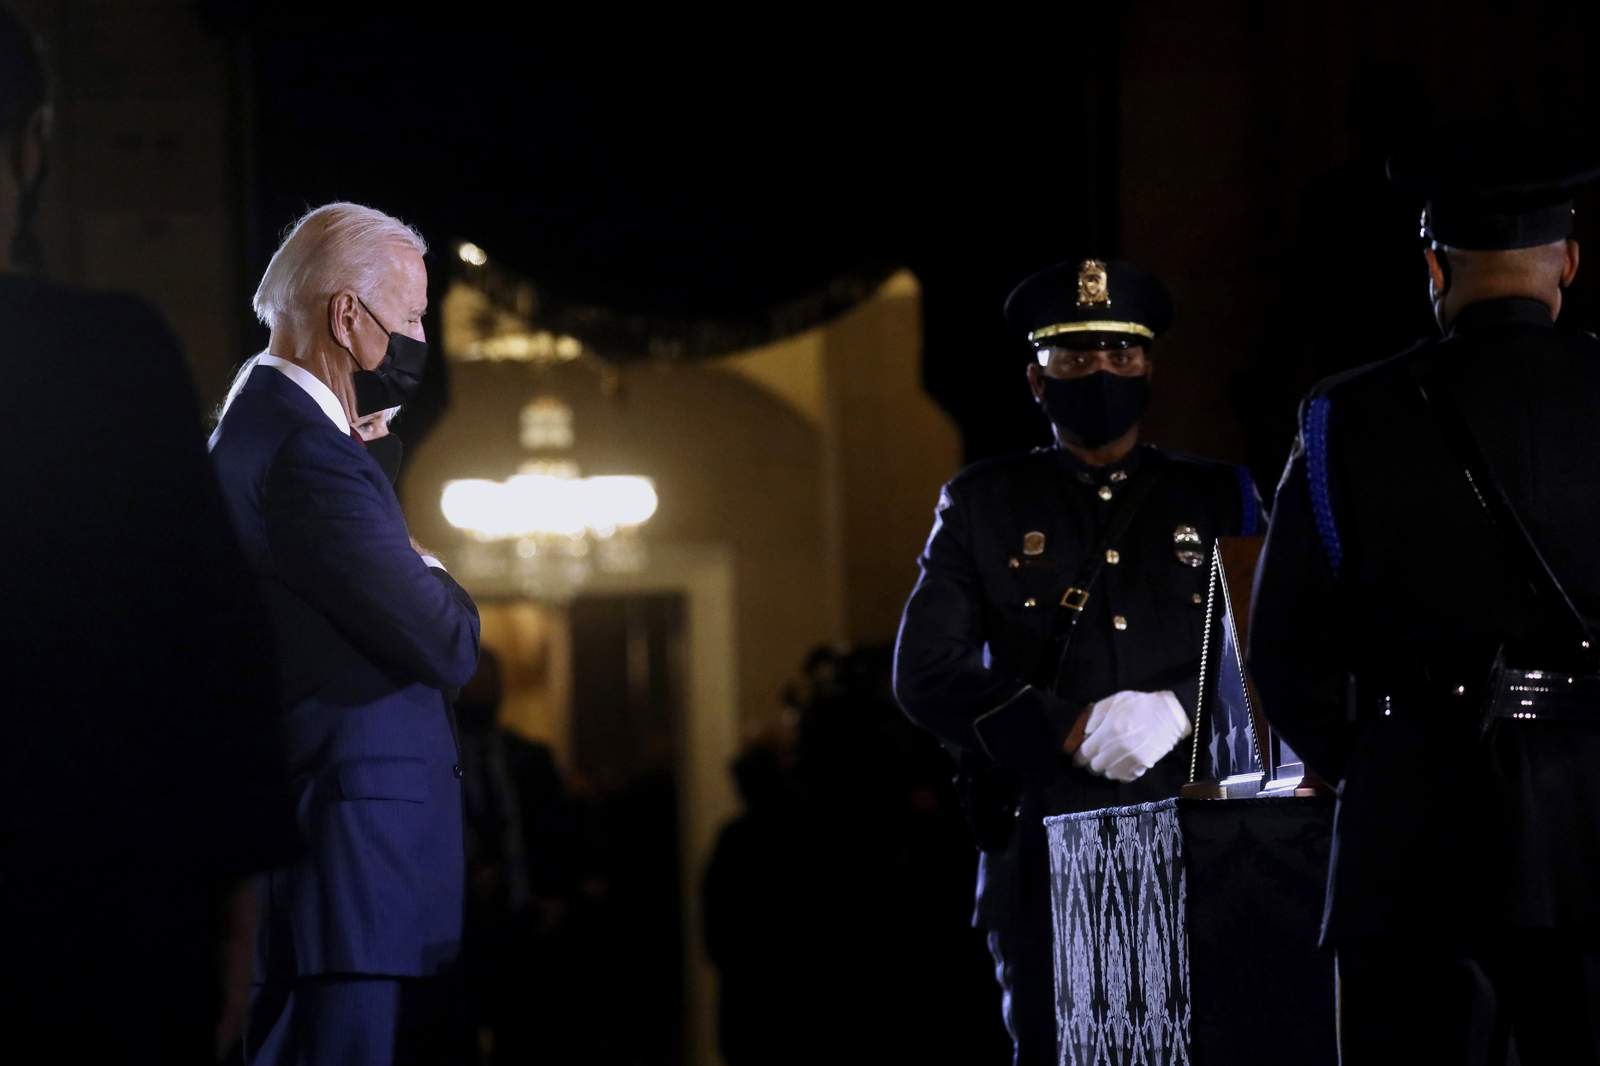 President Biden pays respects to officer who died defending Capitol